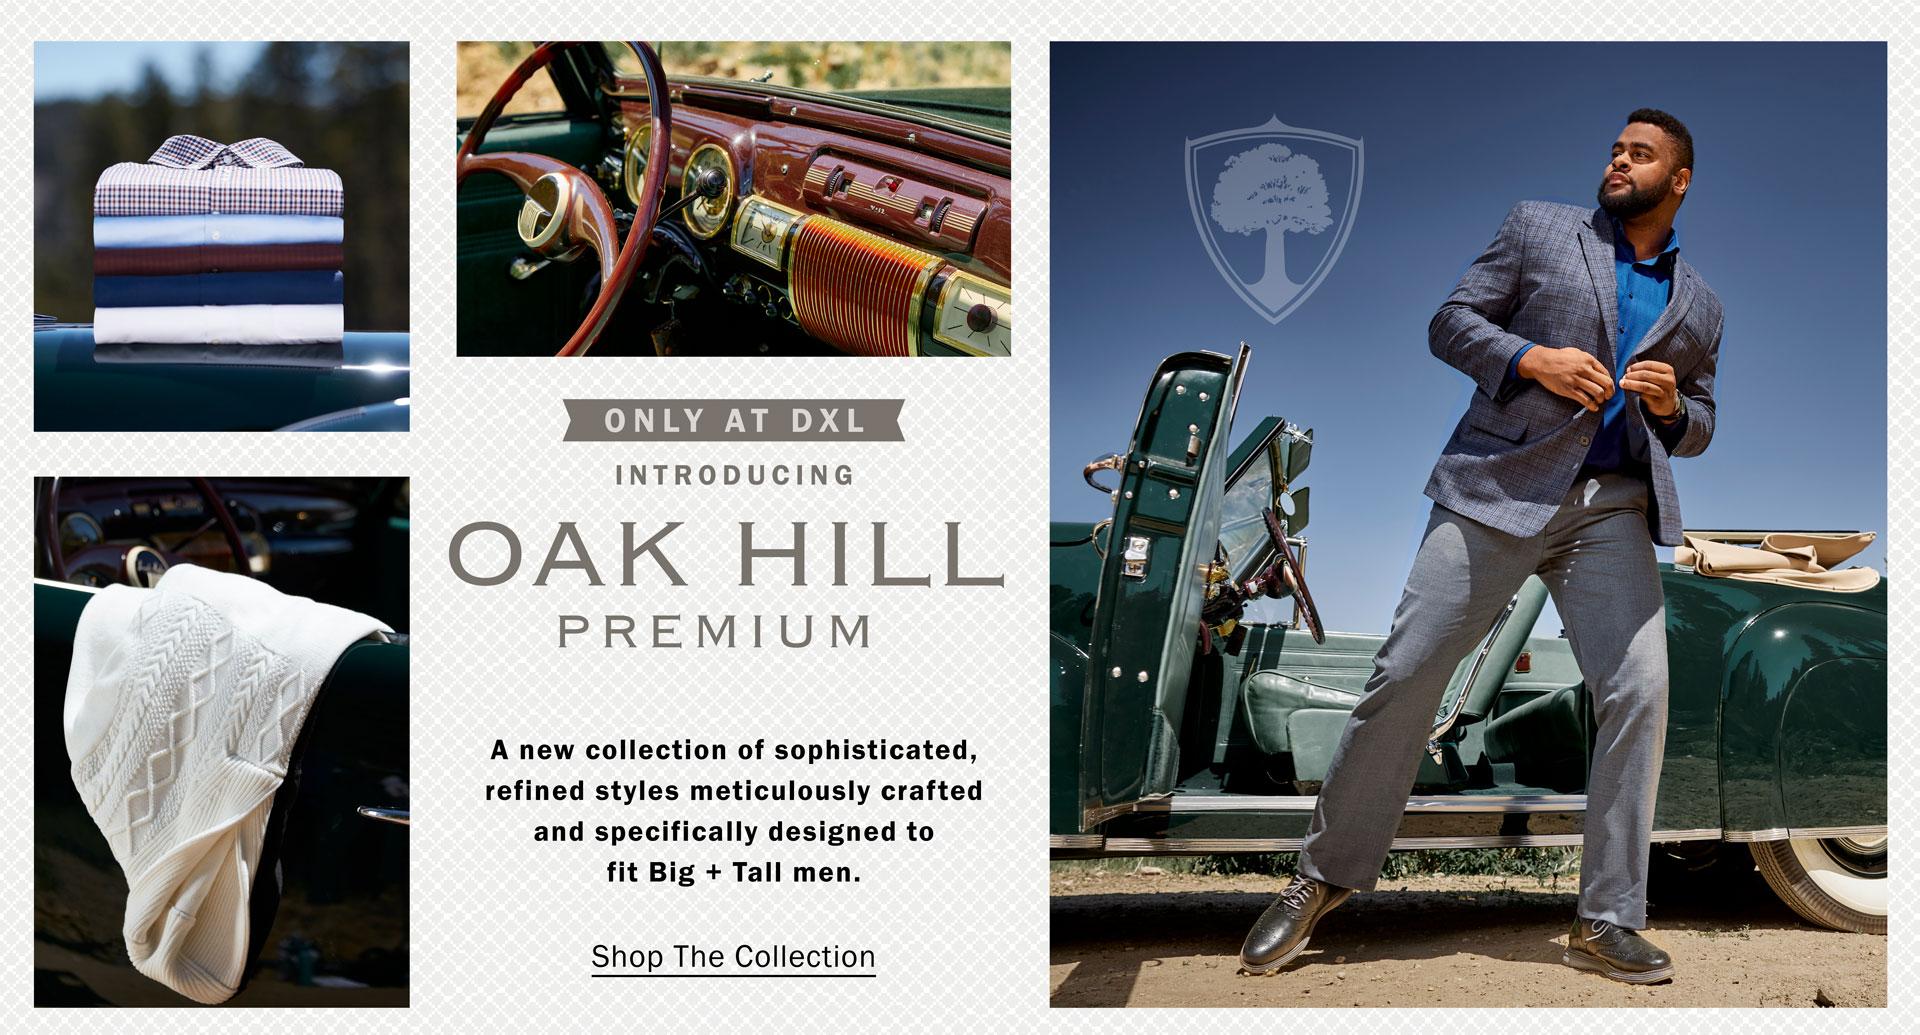 ONLY AT DXL | INTRODUCING OAK HILL PREMIUM | A new collection of sophisticated, refined styles meticulously crafted and specifically designed to fit Bit + Tall men. | Shop The Collection